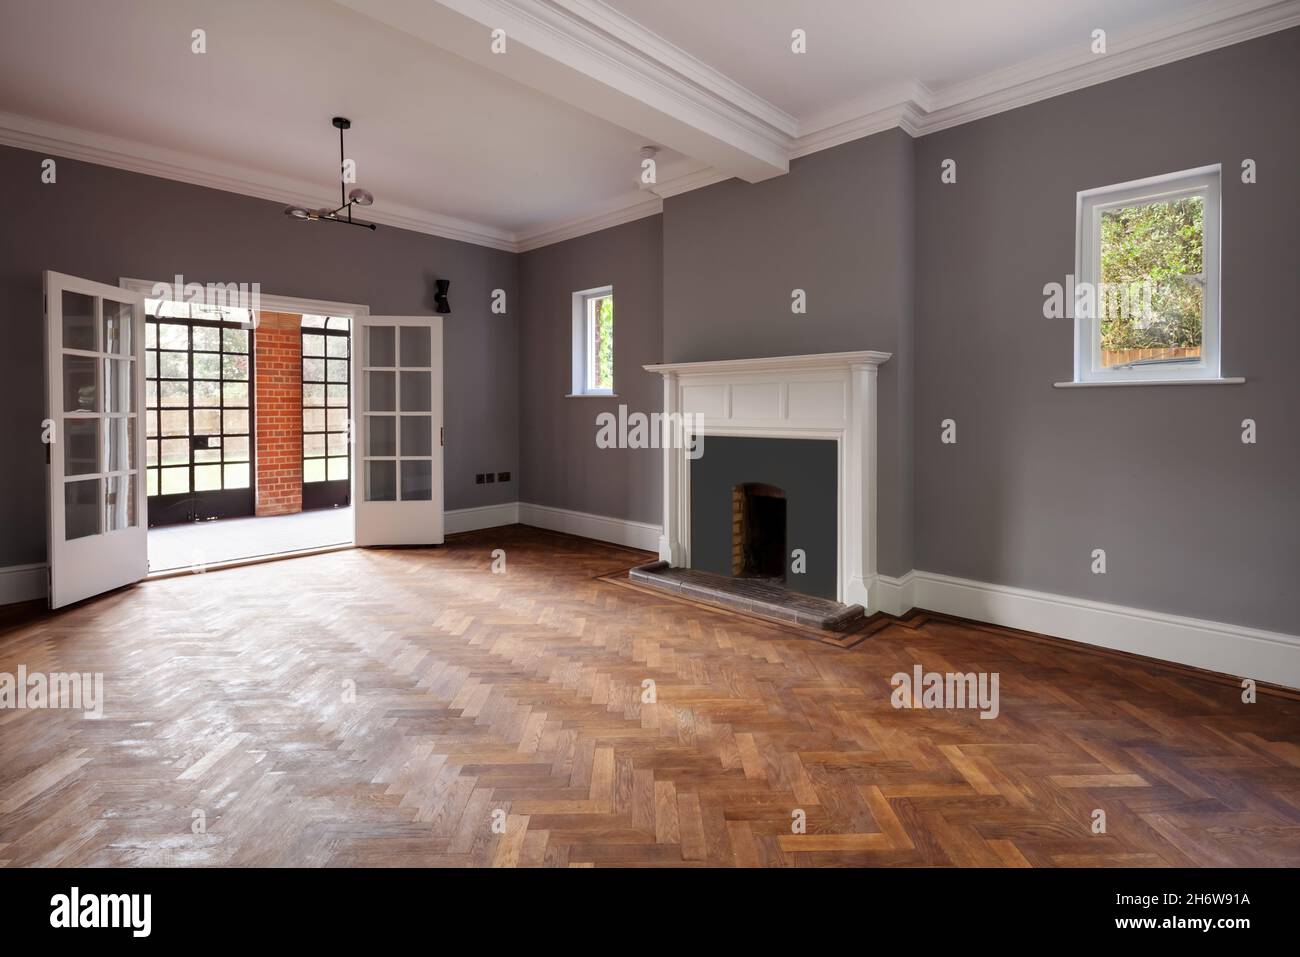 Wratting, England - August 19 2019: Empty traditional British living room renovated to retain many of the original features including parquet floor Stock Photo